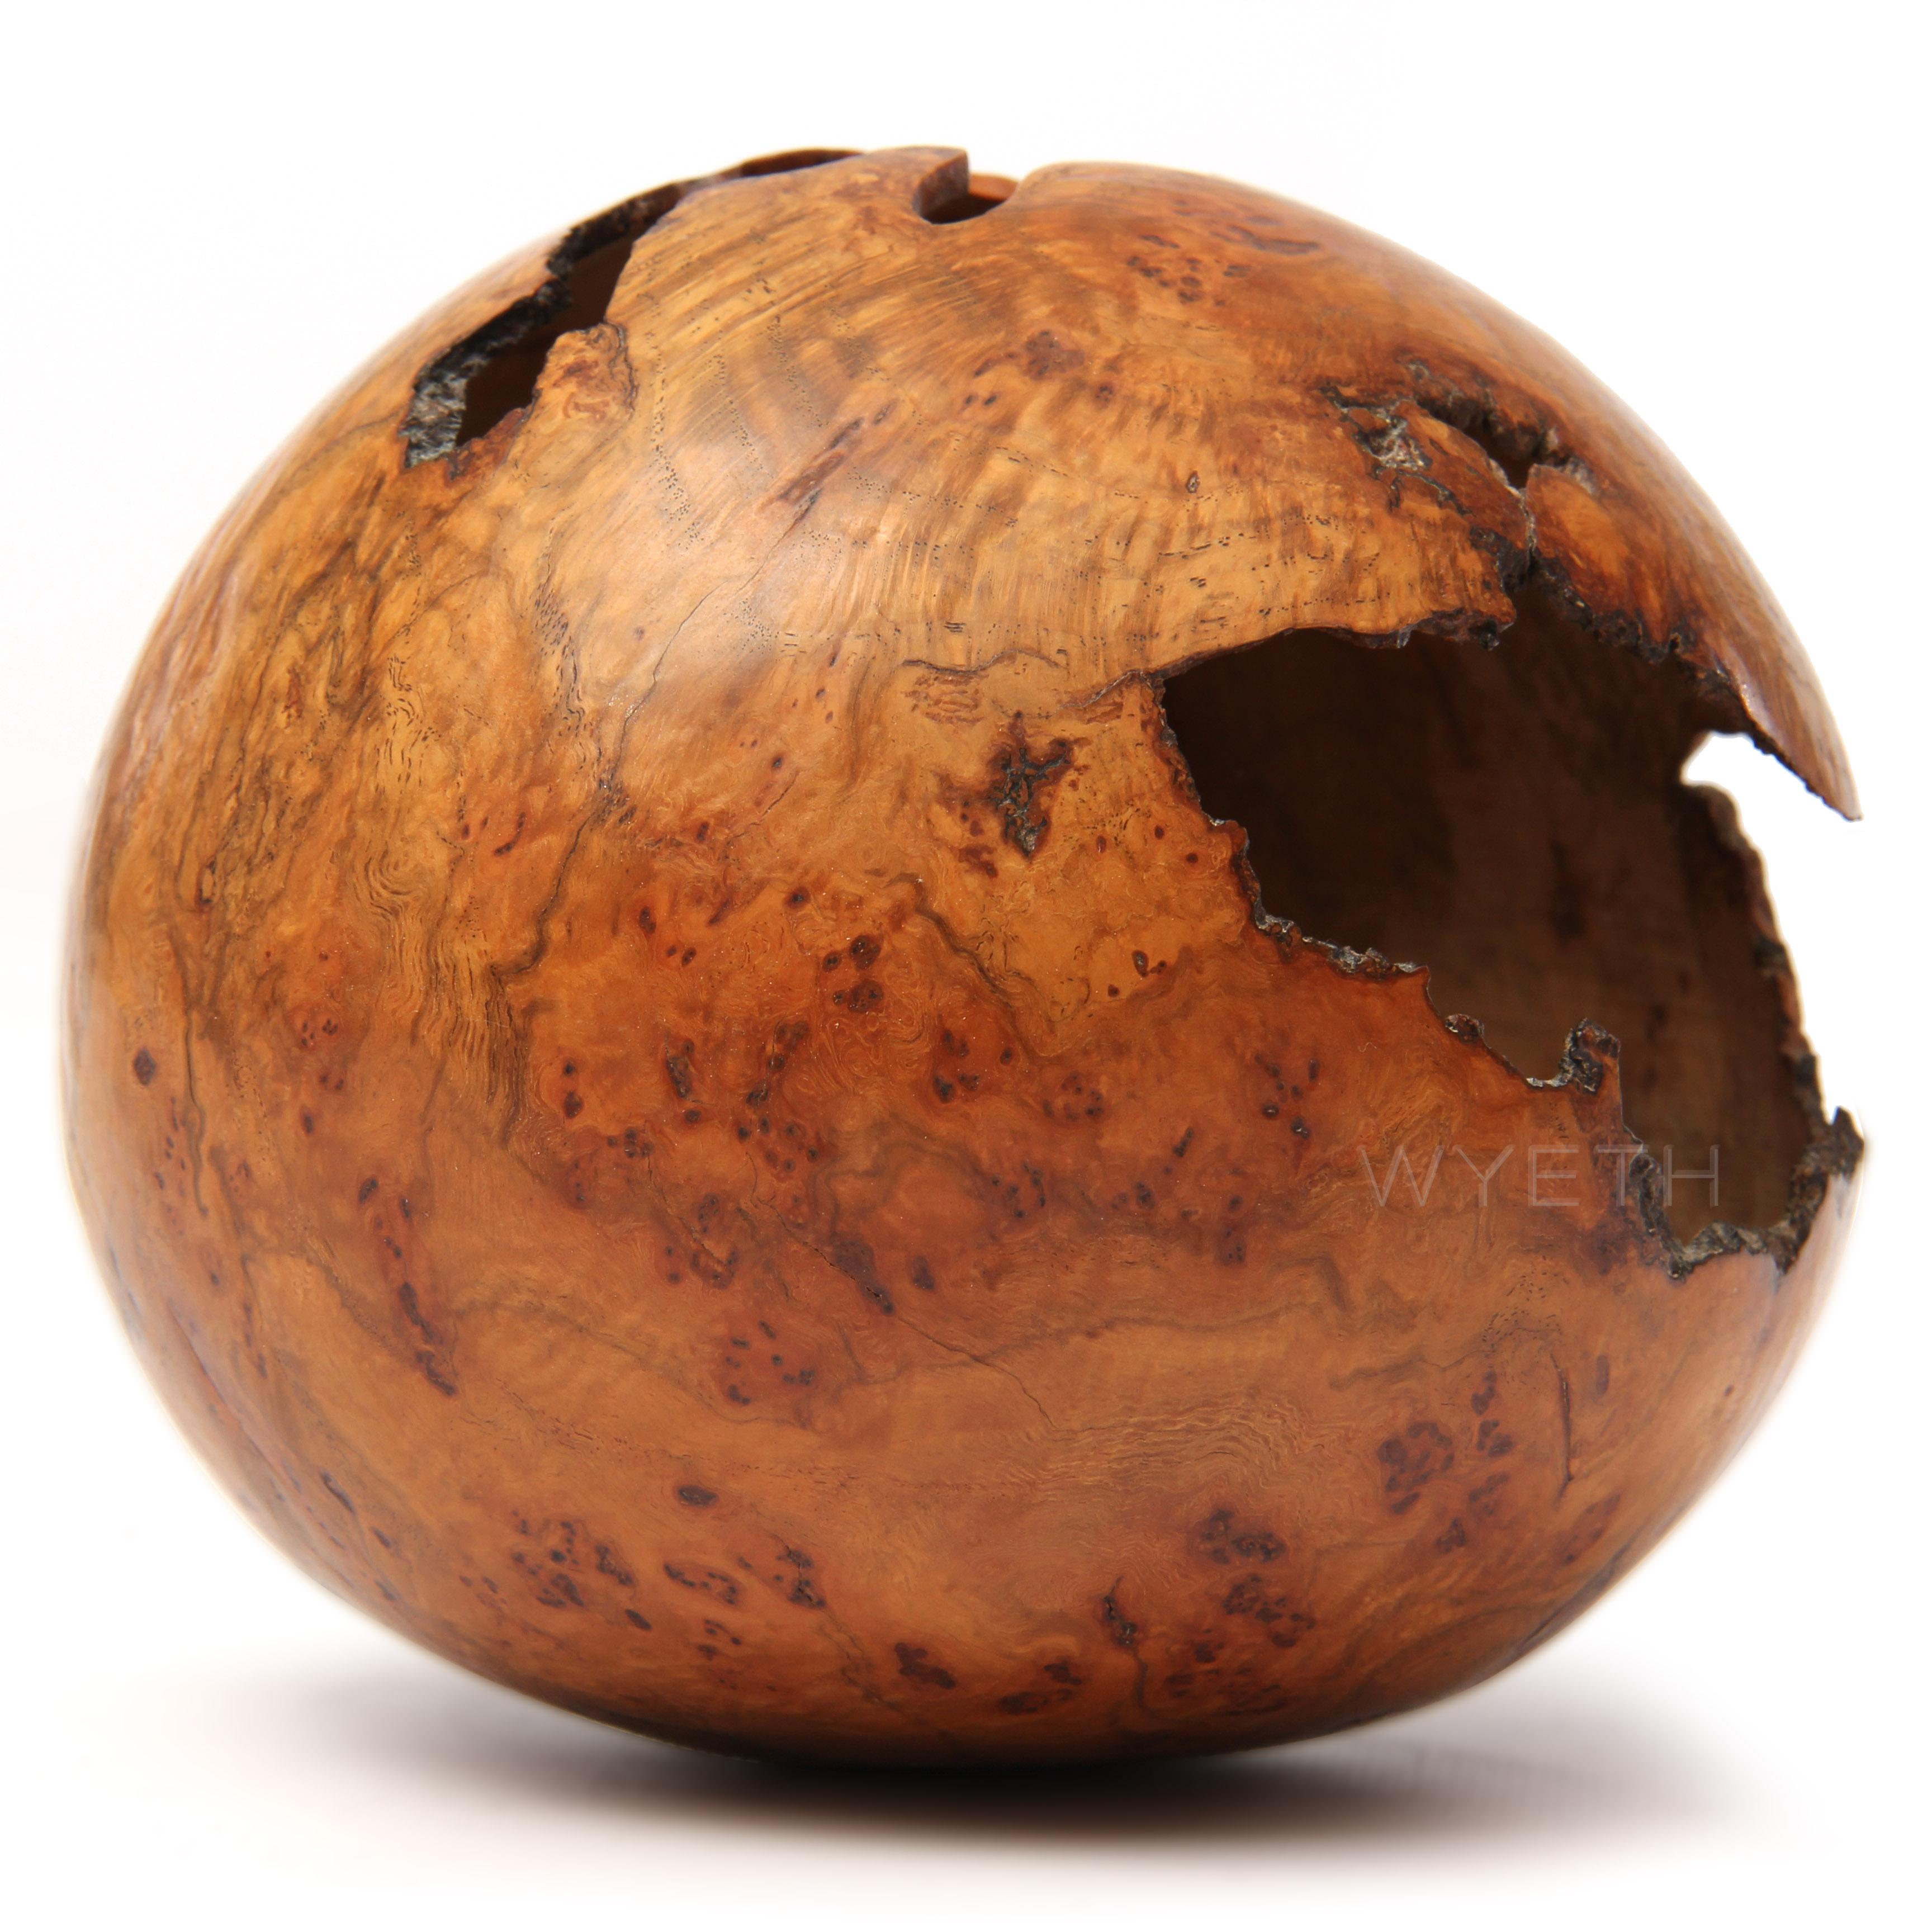 A delicate lathe turned sphere in red oak burl with natural occlusions. Signed 